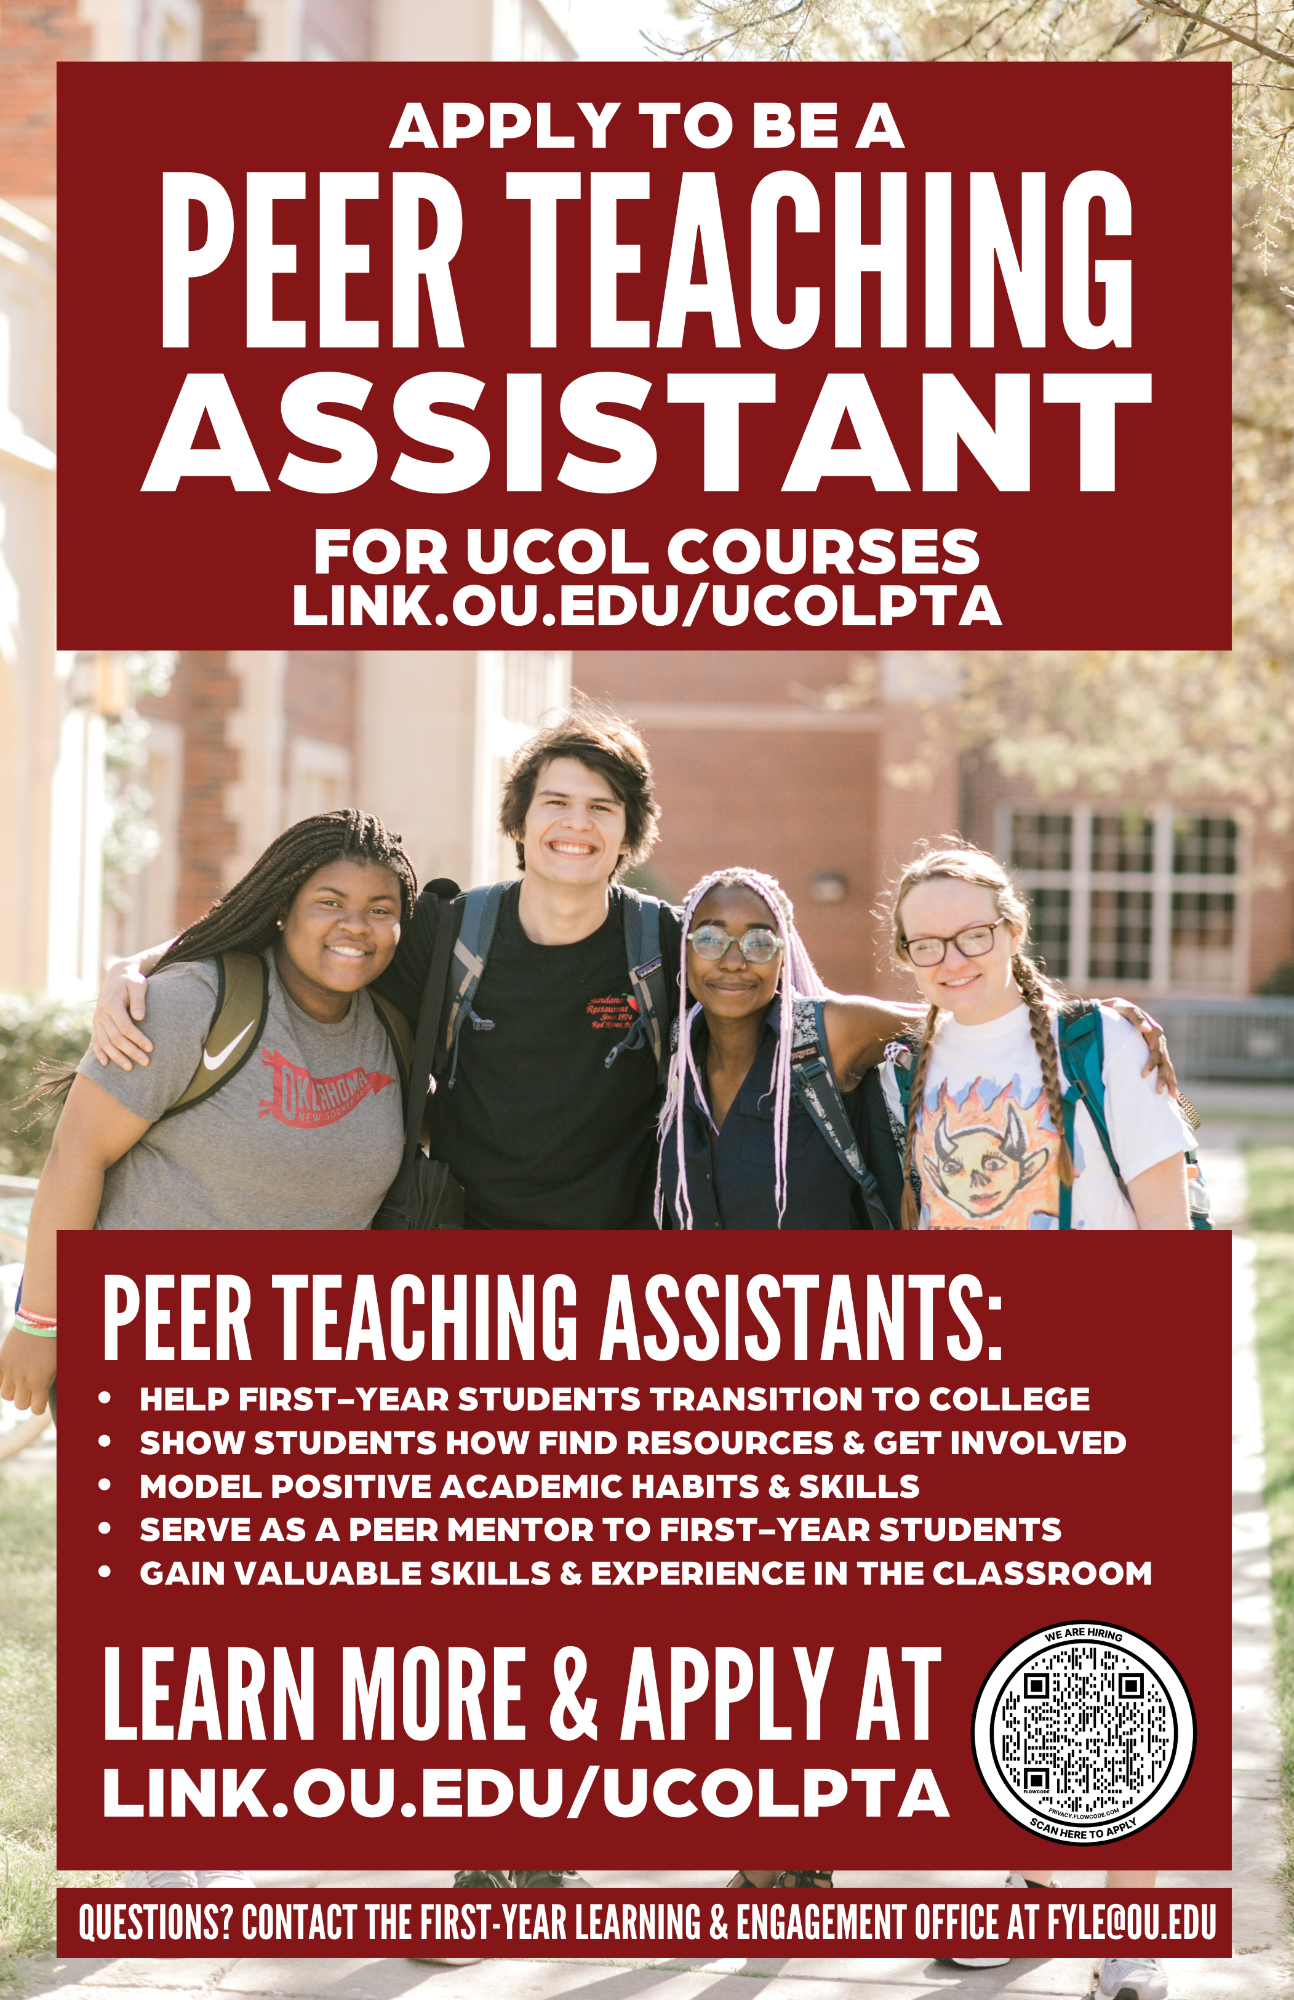 Flyer for the PTA Position.  Apply to be a Peer Teaching Assistant for UCOL Courses at link.ou.edu/ucolpta